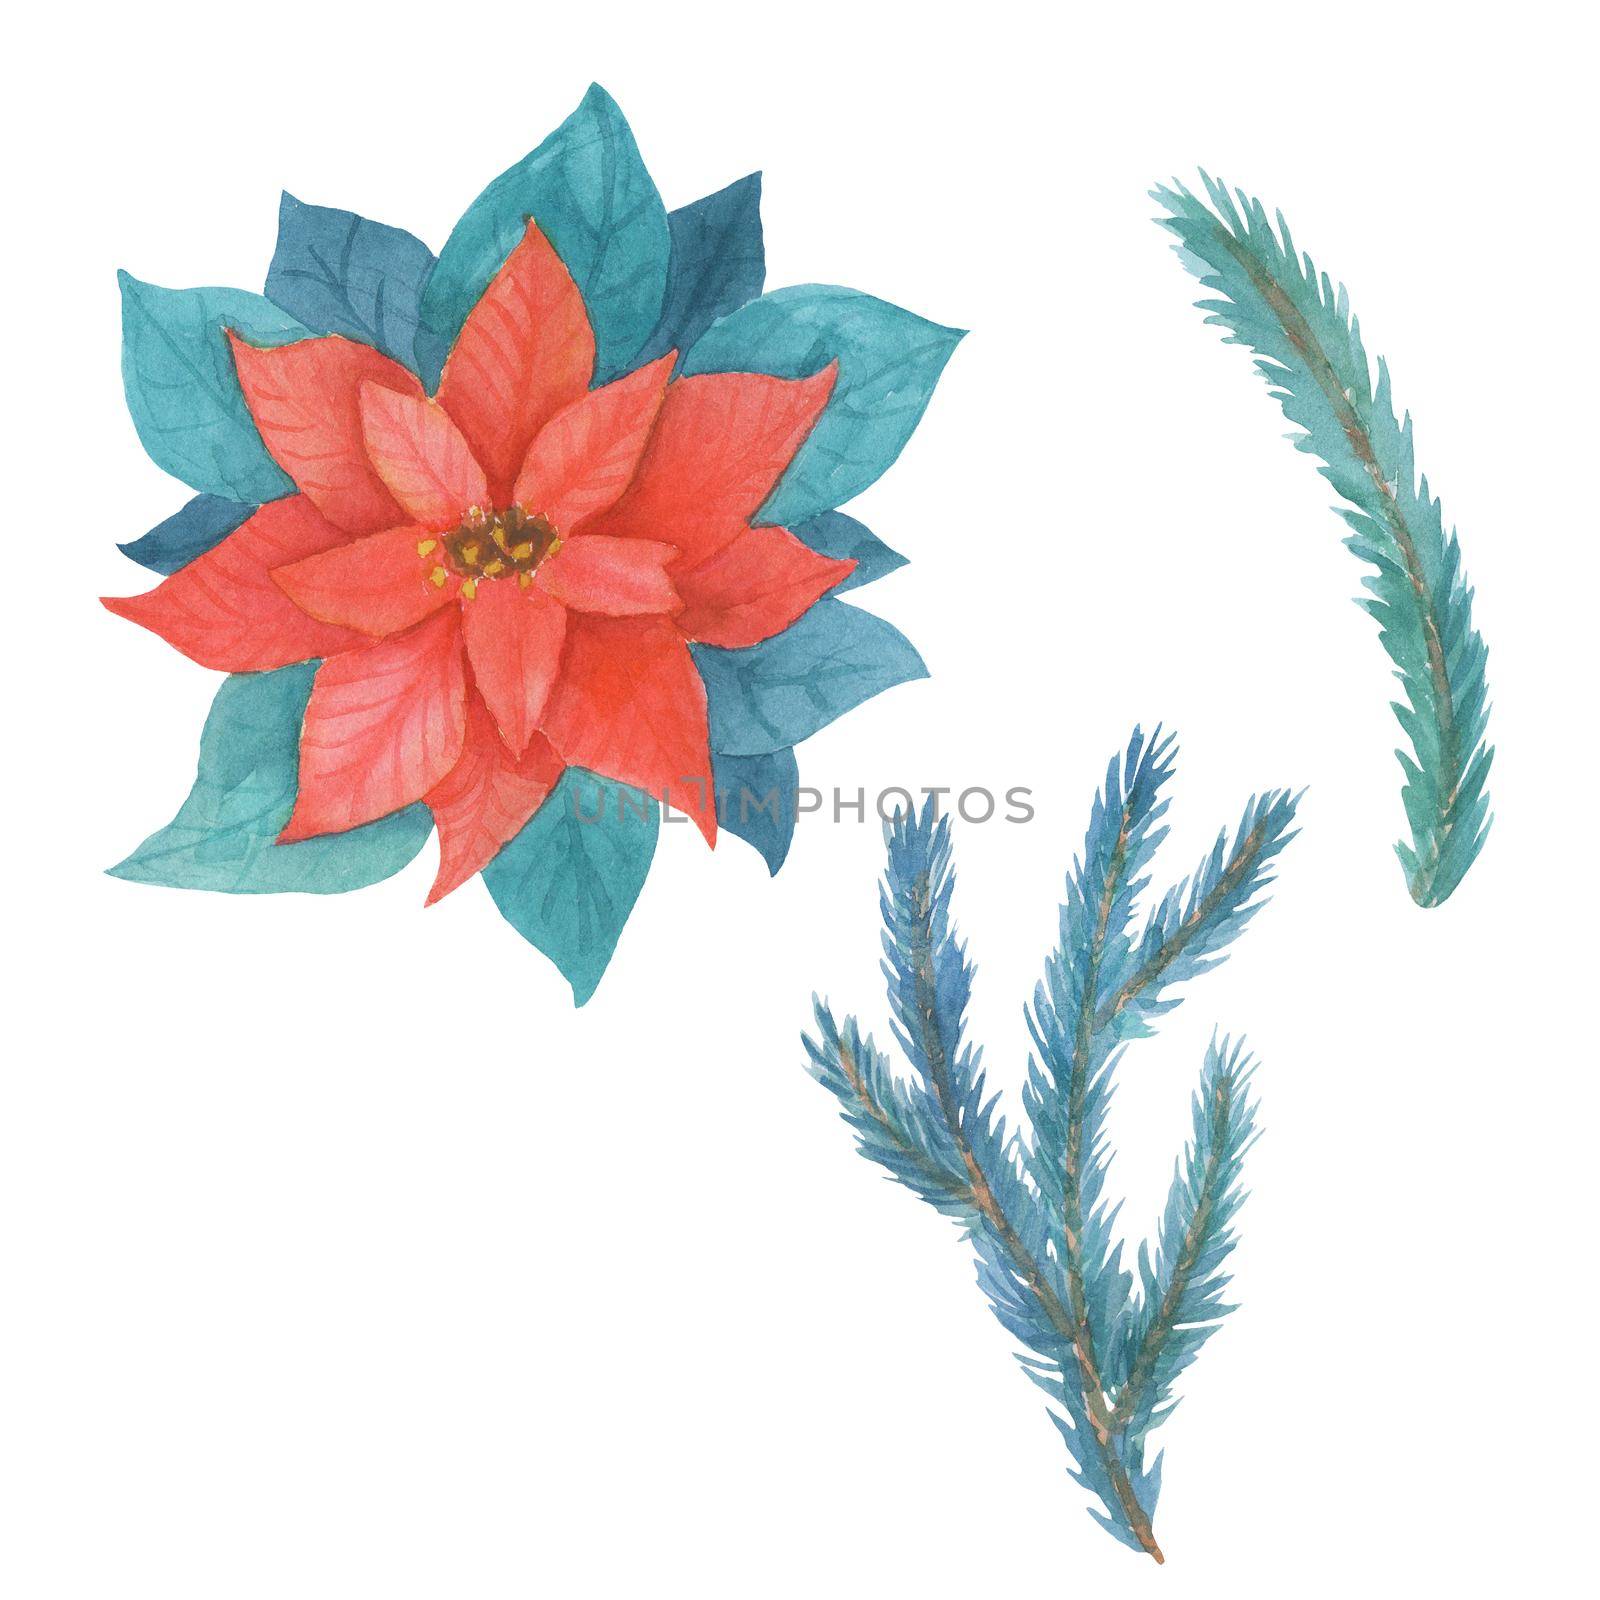 Poinsettia Flower and Fir Tree Branch Set. Watercolor illustration isolated on white by ElenaPlatova